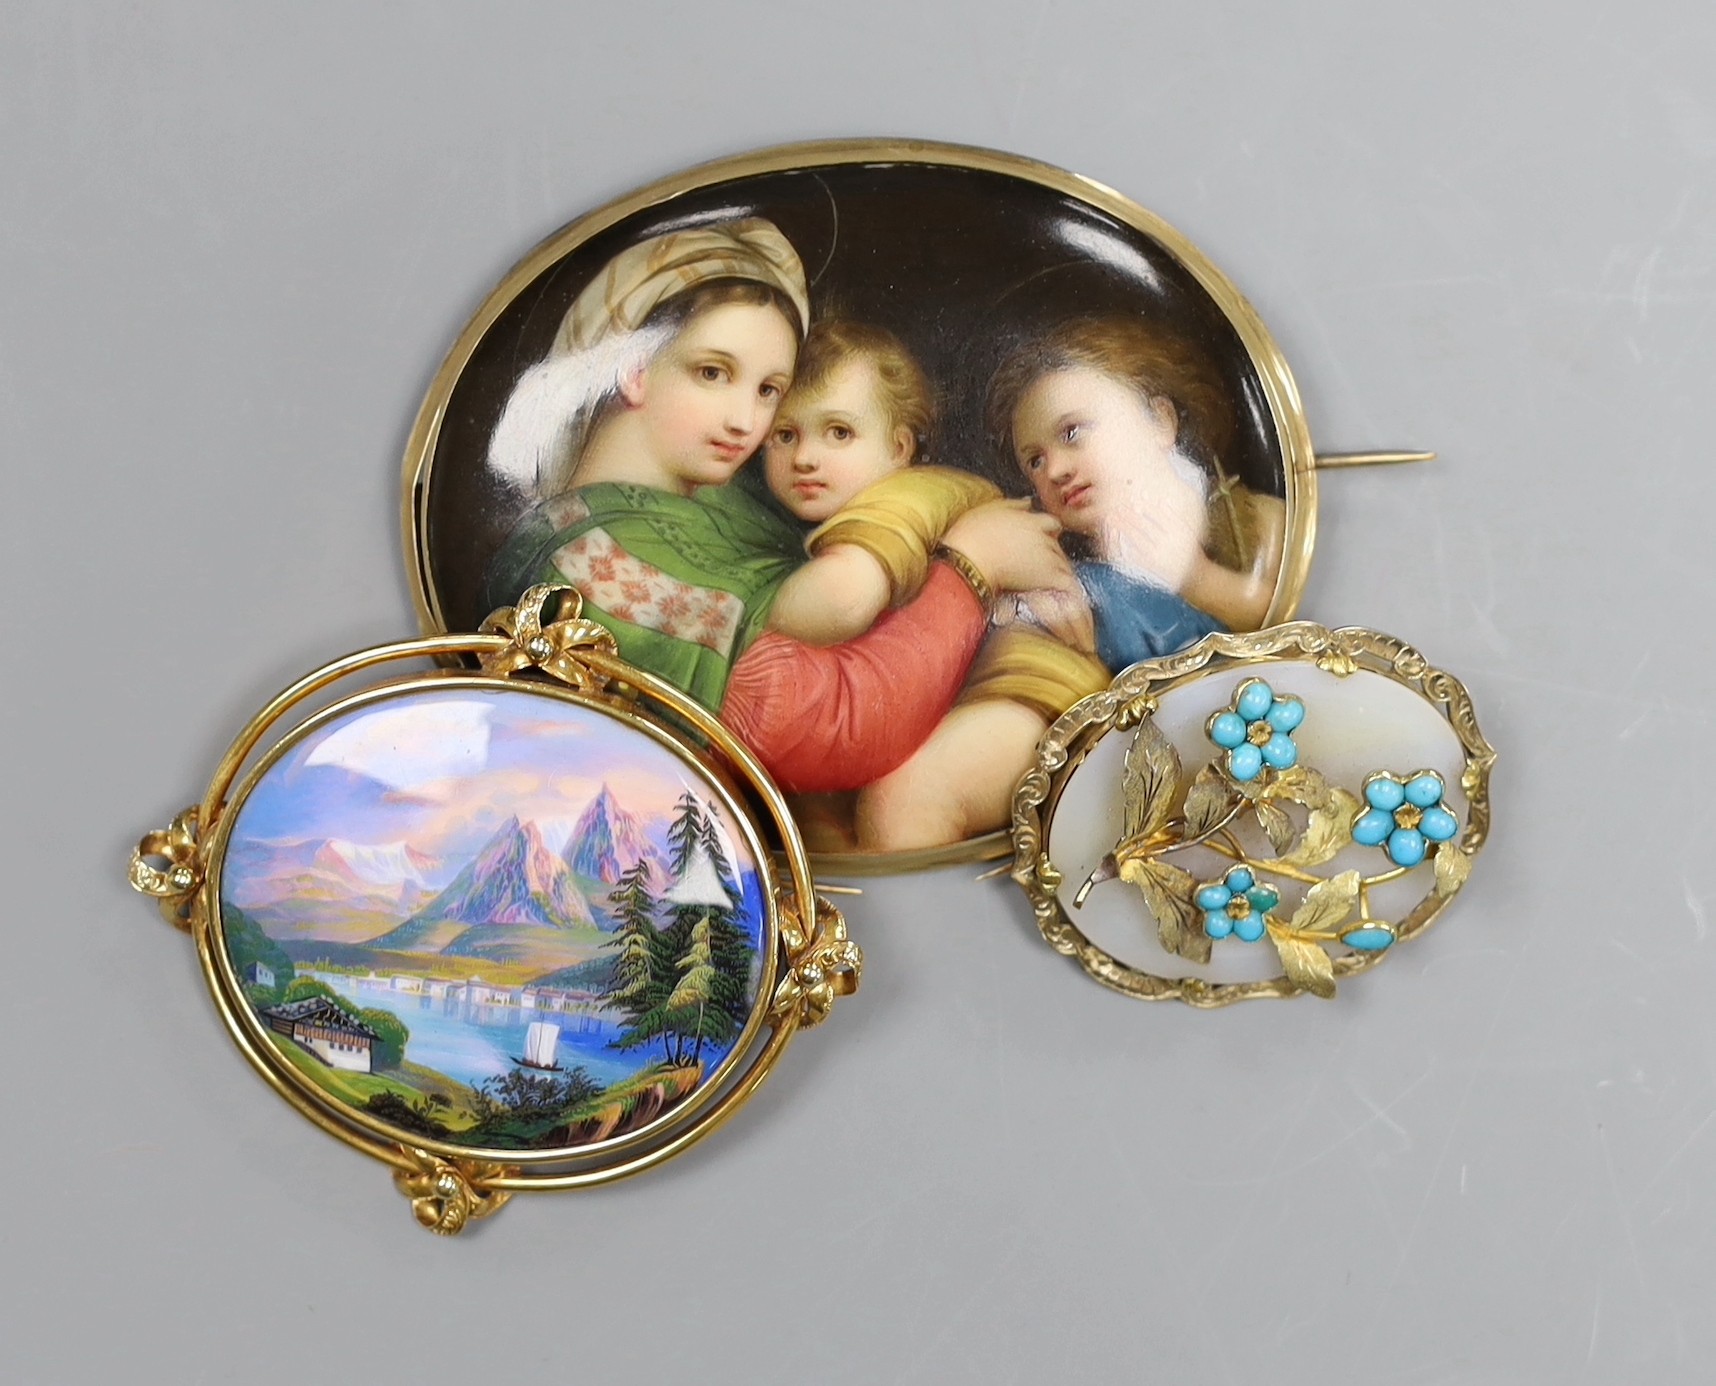 A Victorian 15ct gold mounted porcelain plaque, decorated with the Madonna della Sedia, 8cm, a Swiss landscape enamel brooch with 15ct mount, 6.5cm and a Pinchbeck brooch with turquoise set foliate decoration